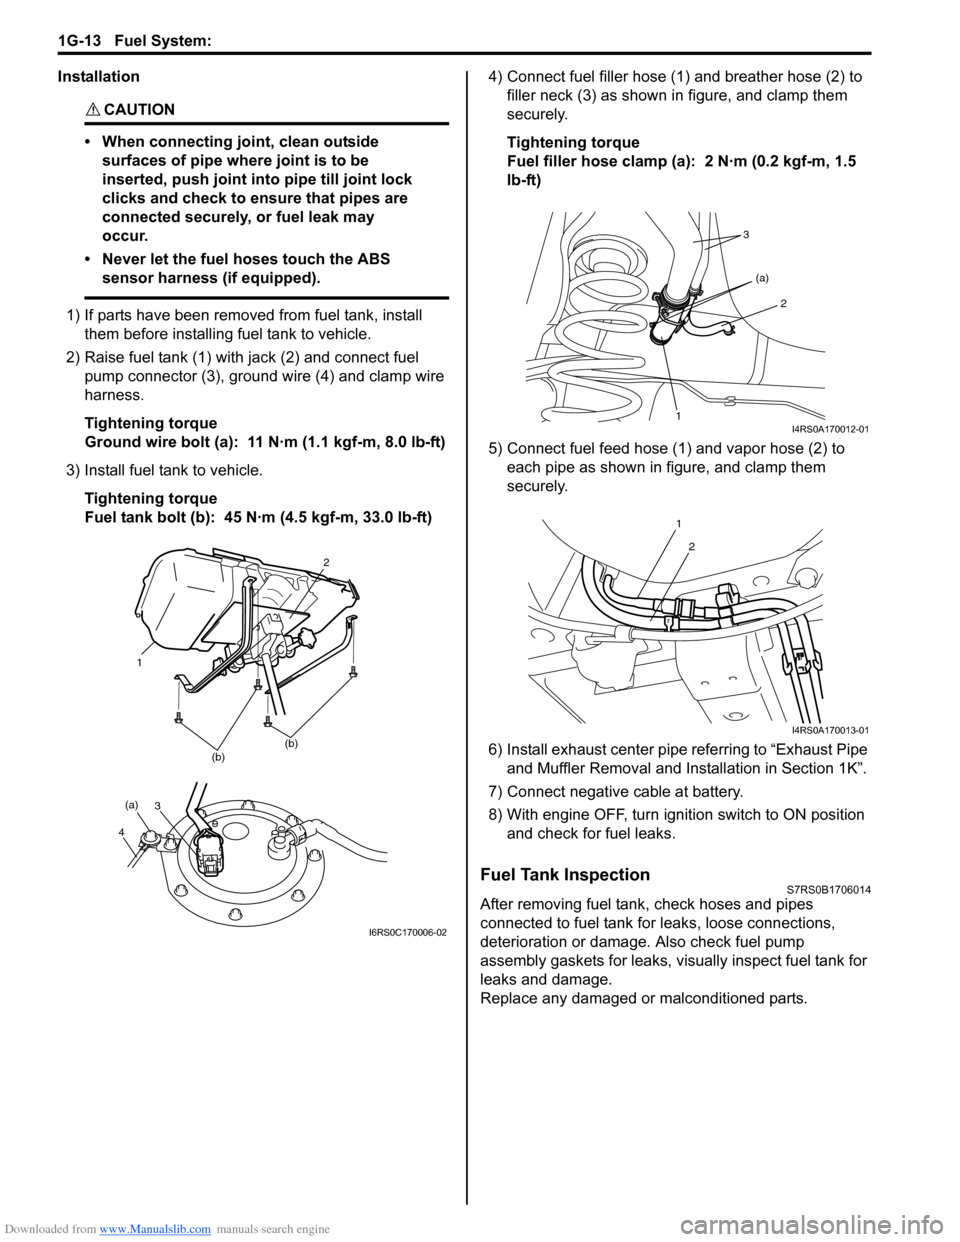 SUZUKI SWIFT 2008 2.G Service Workshop Manual Downloaded from www.Manualslib.com manuals search engine 1G-13 Fuel System: 
Installation
CAUTION! 
• When connecting joint, clean outside surfaces of pipe where joint is to be 
inserted, push joint